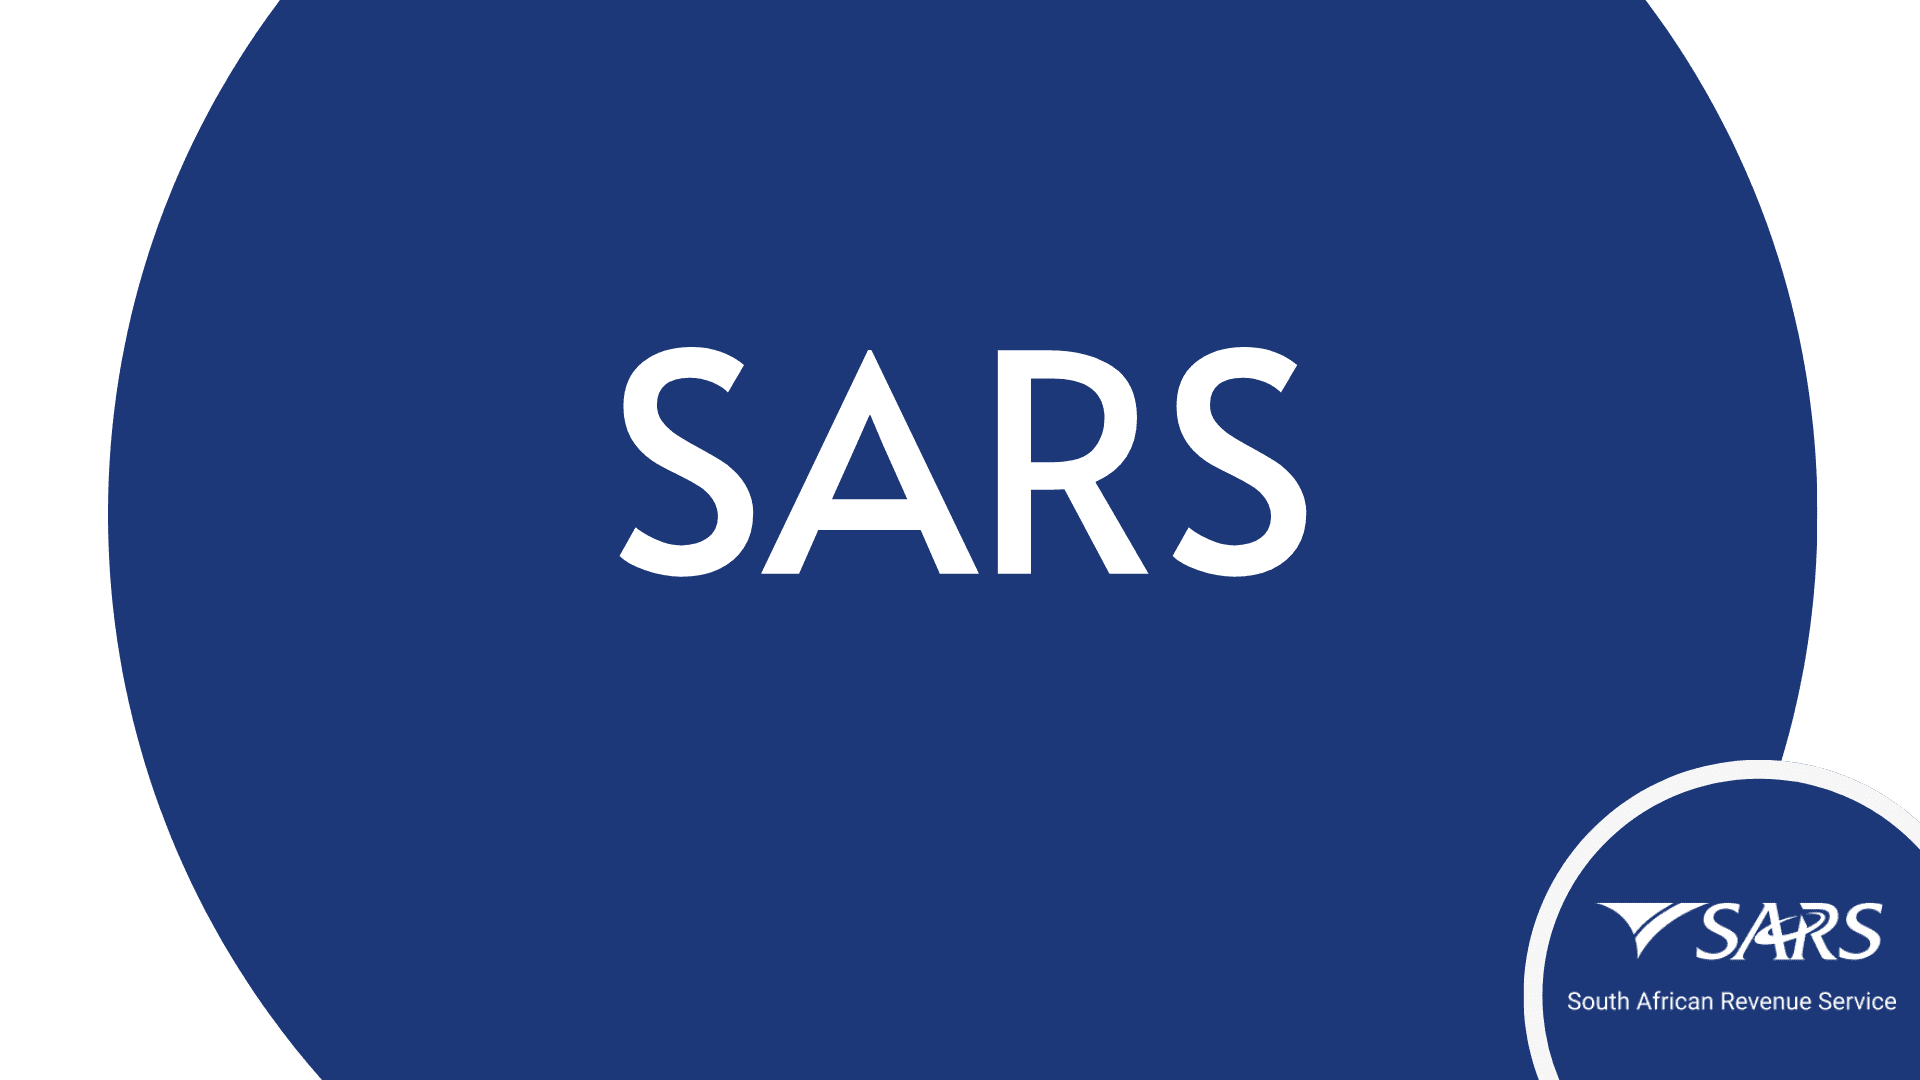 what is SARS?